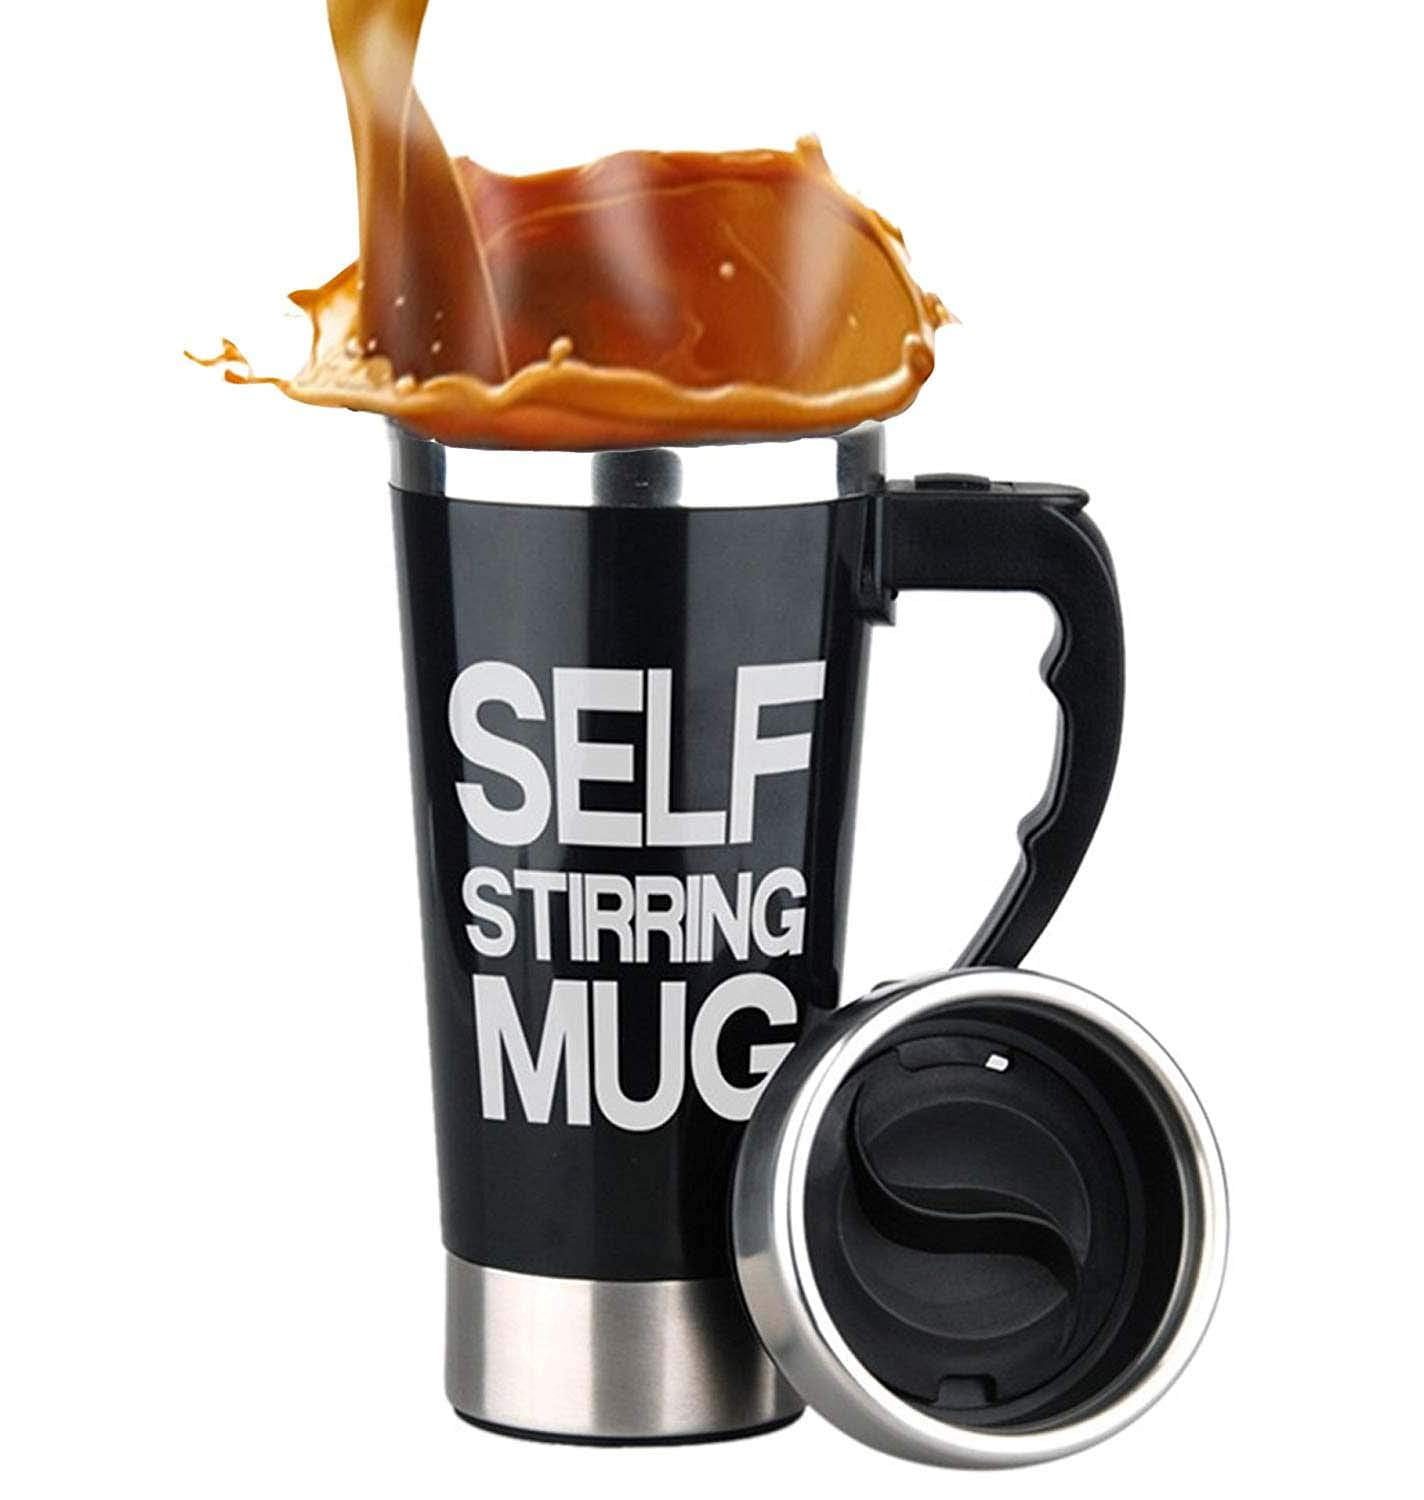  ActionEliters Self Stirring Mug, Over 80℃ Self Stirring Coffee  Mug, Auto Self Mixing Coffee Mug 304 Stainless Steel Cup for Office/Home,  Christmas Birthday Gift, No Battery Or Charge : Home 